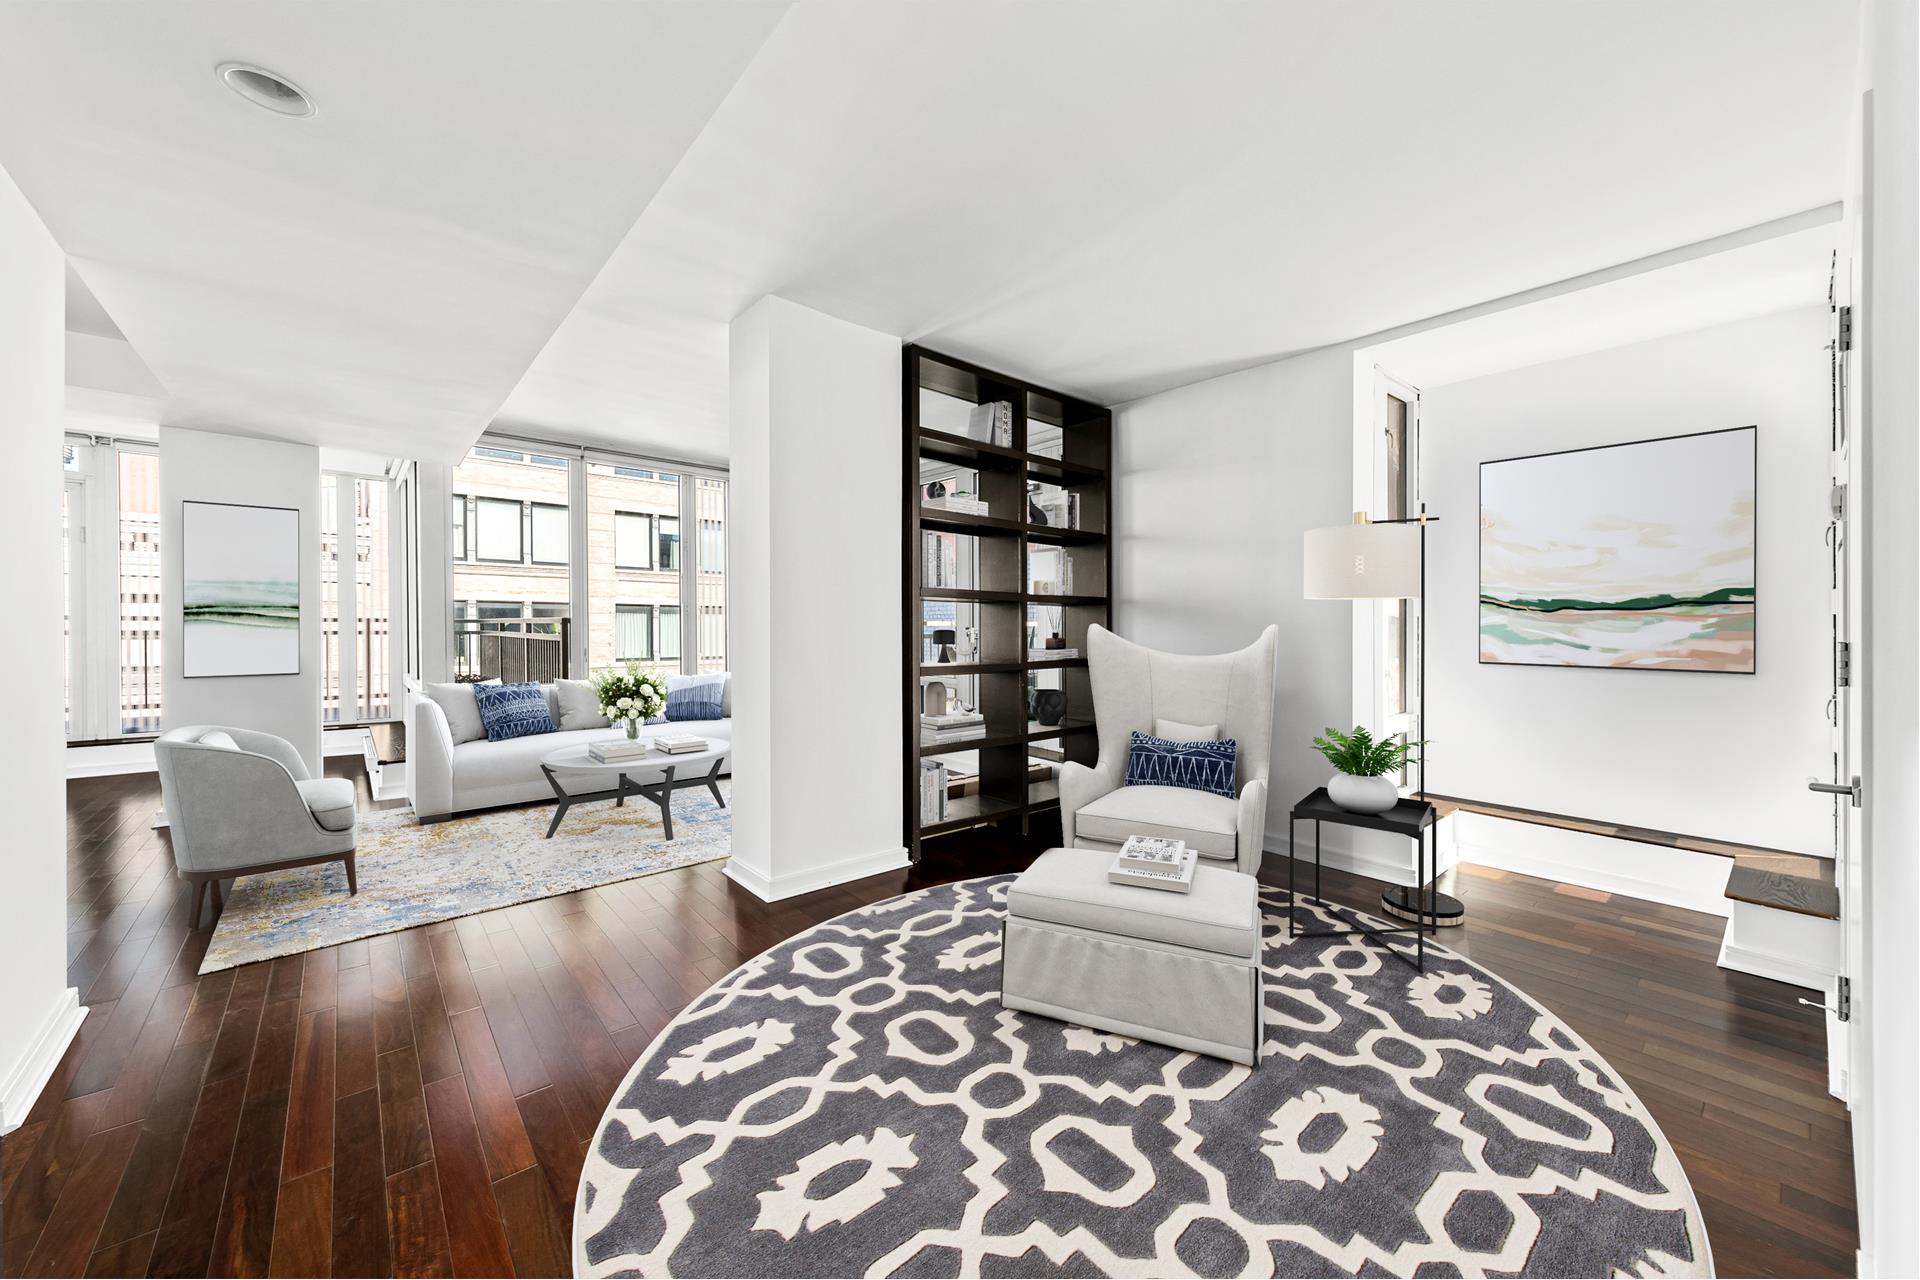 130 West 19th Street Ph1b, Chelsea, Downtown, NYC - 3 Bedrooms  
2.5 Bathrooms  
6 Rooms - 